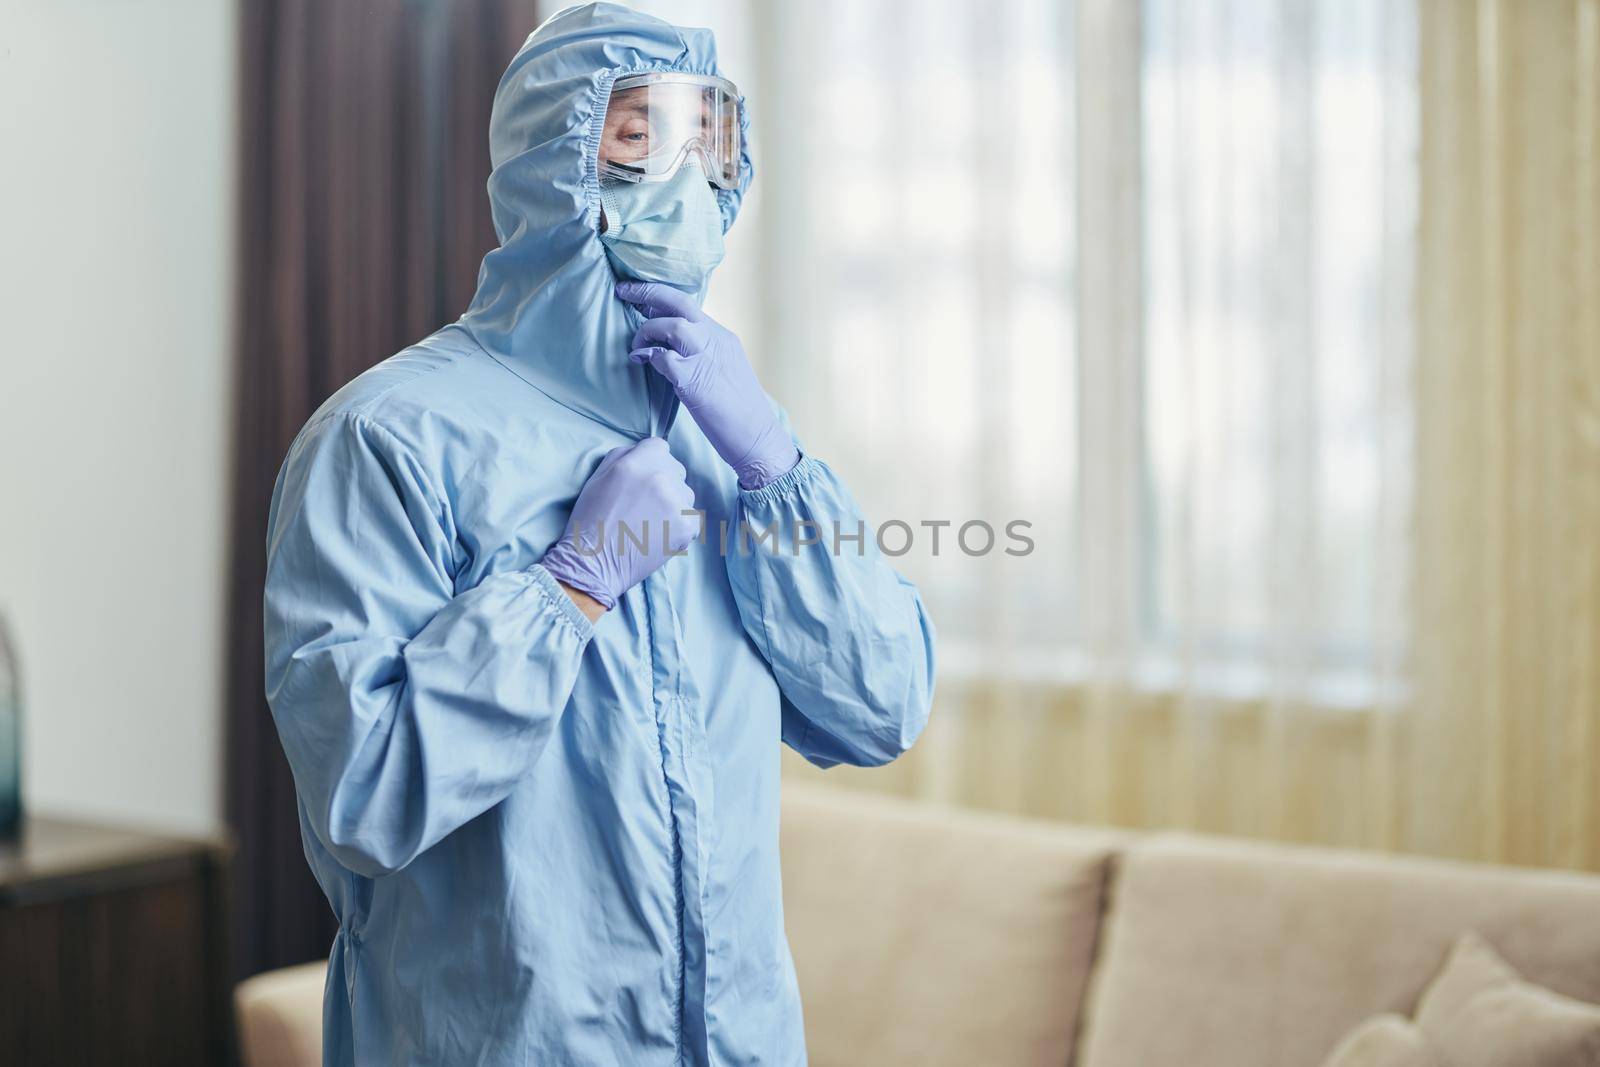 Waist up of worker standing in hotel apartments in protective clothing. Coronavirus and quarantine concept